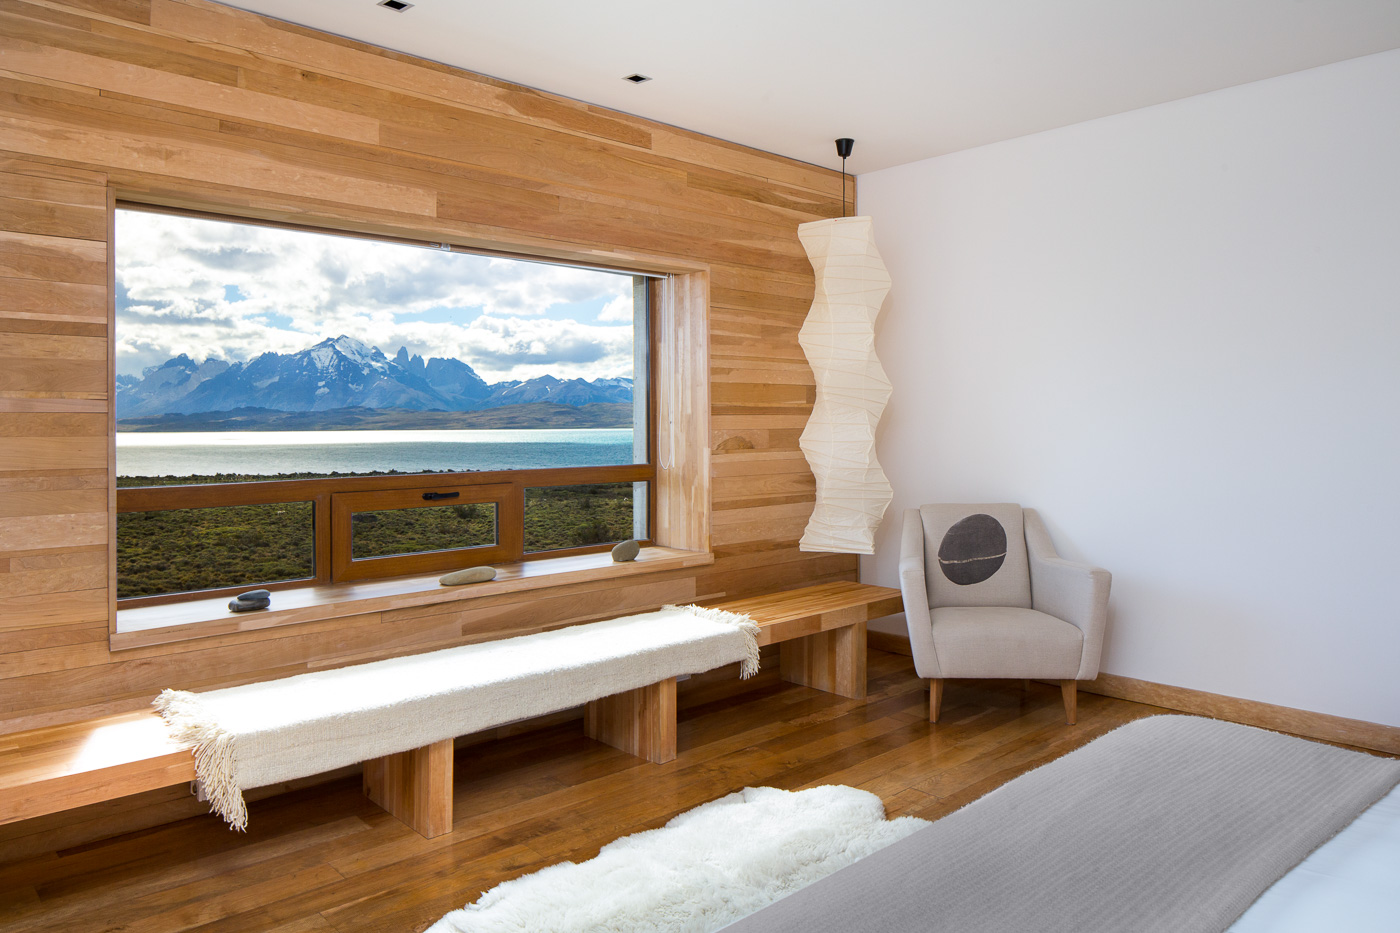 Interior room of Tierra Patagonia looking outside the window at the mountains